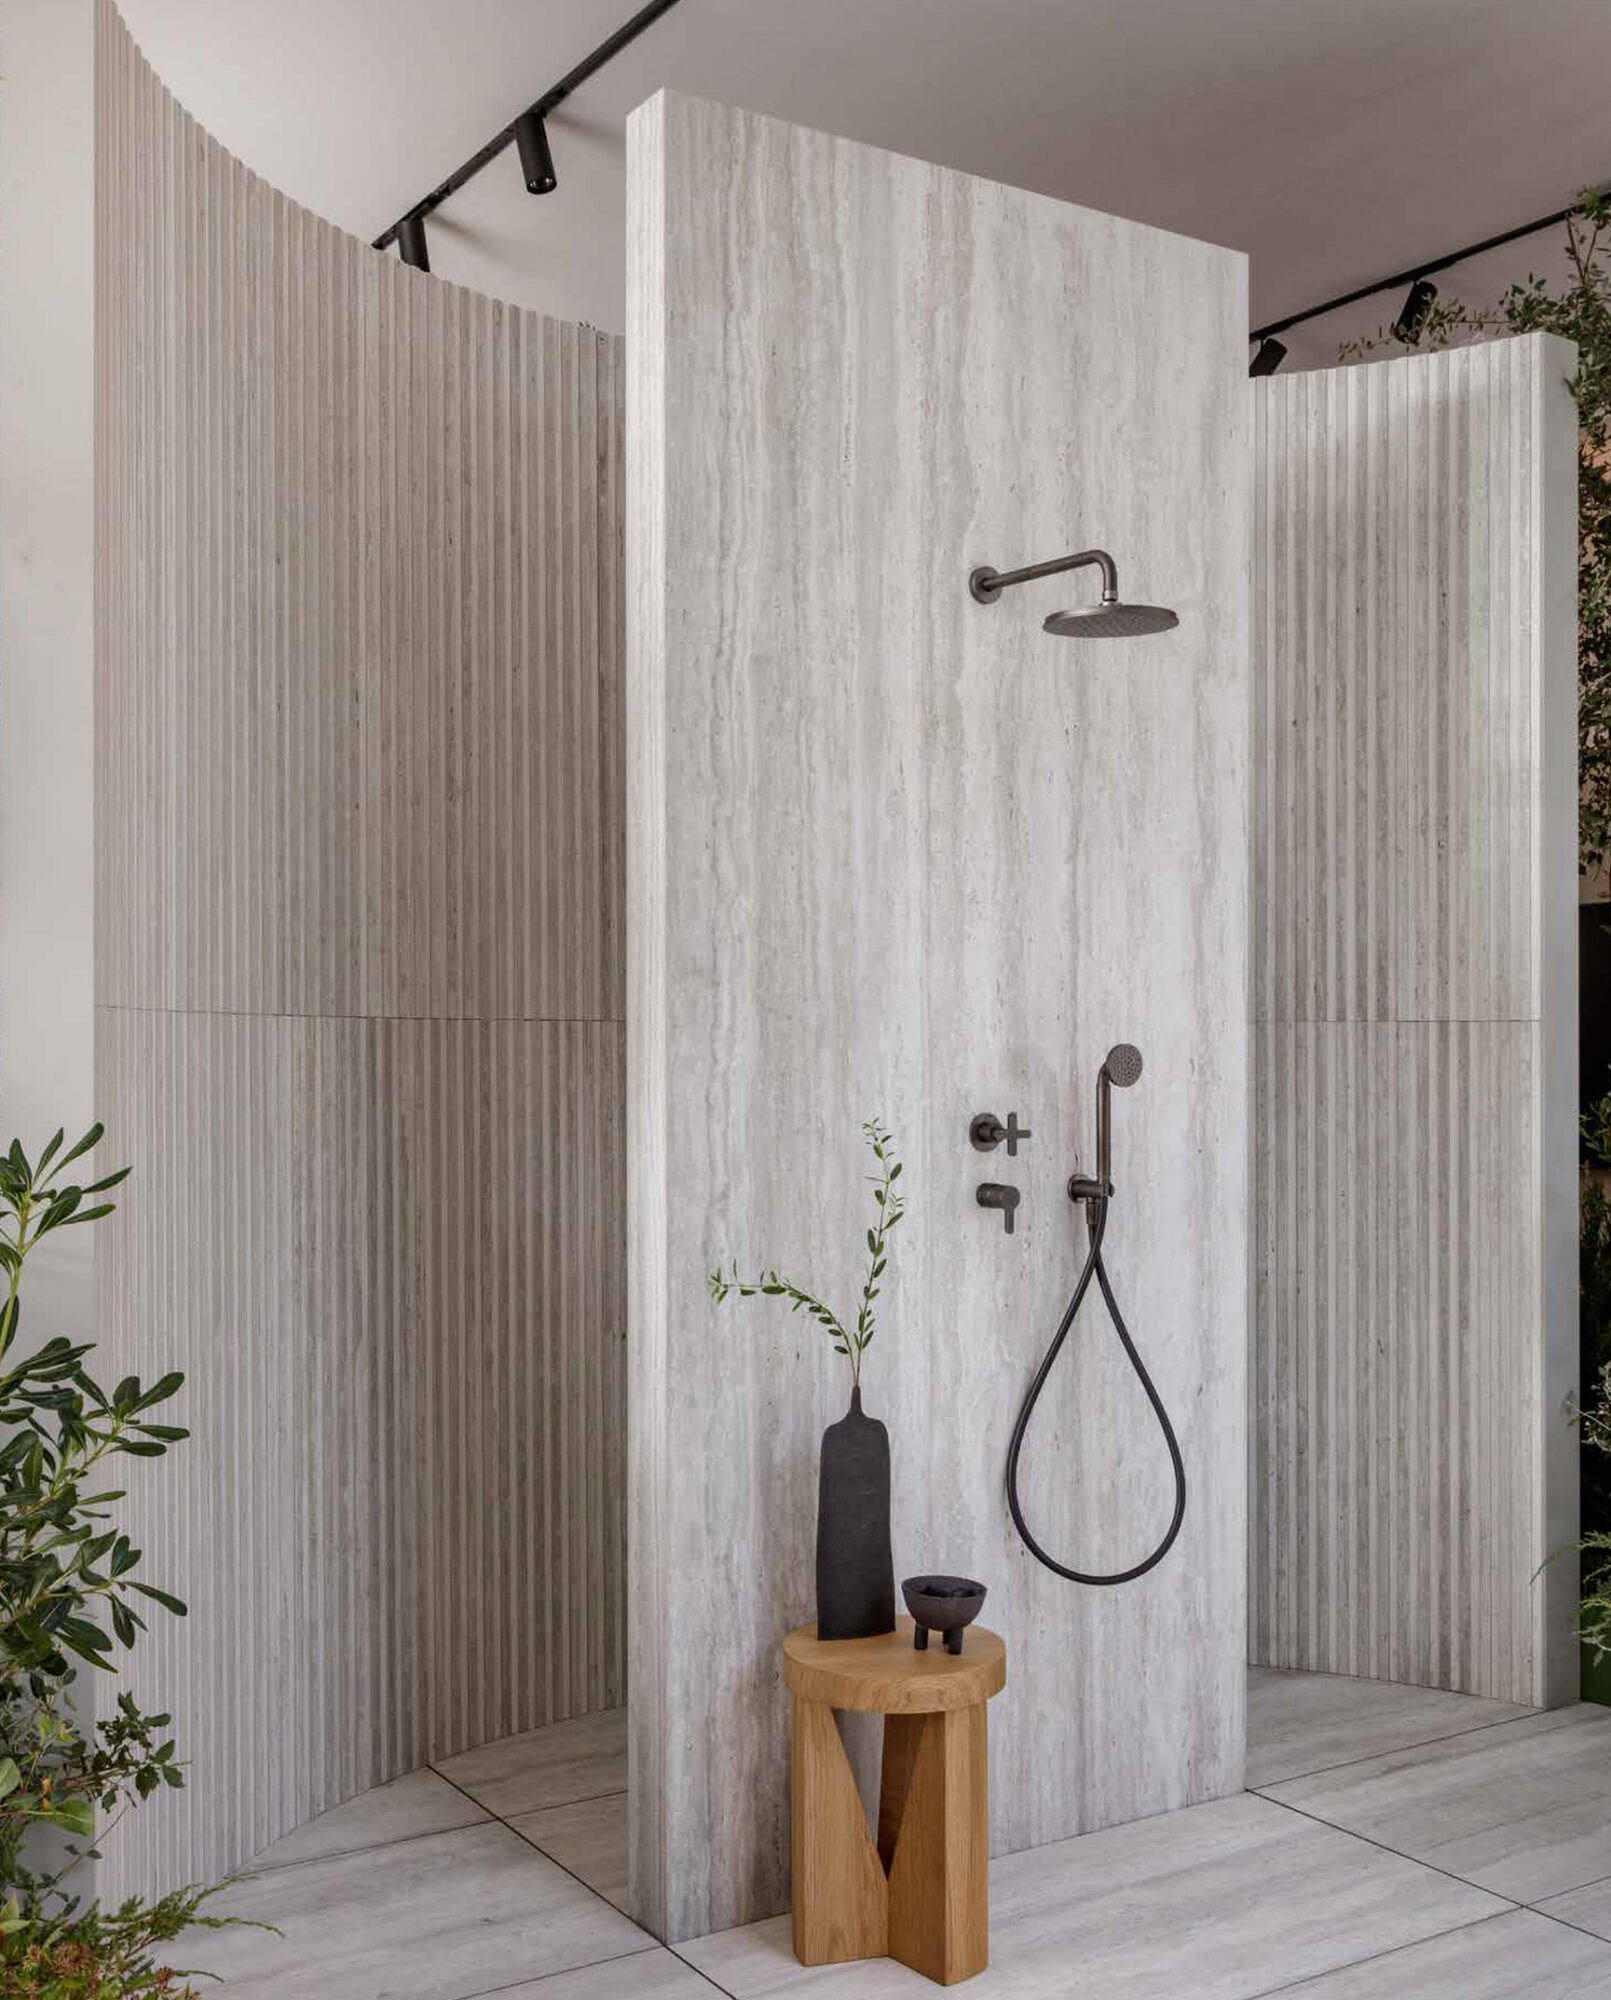 a shower with a rope and a vase on a stool